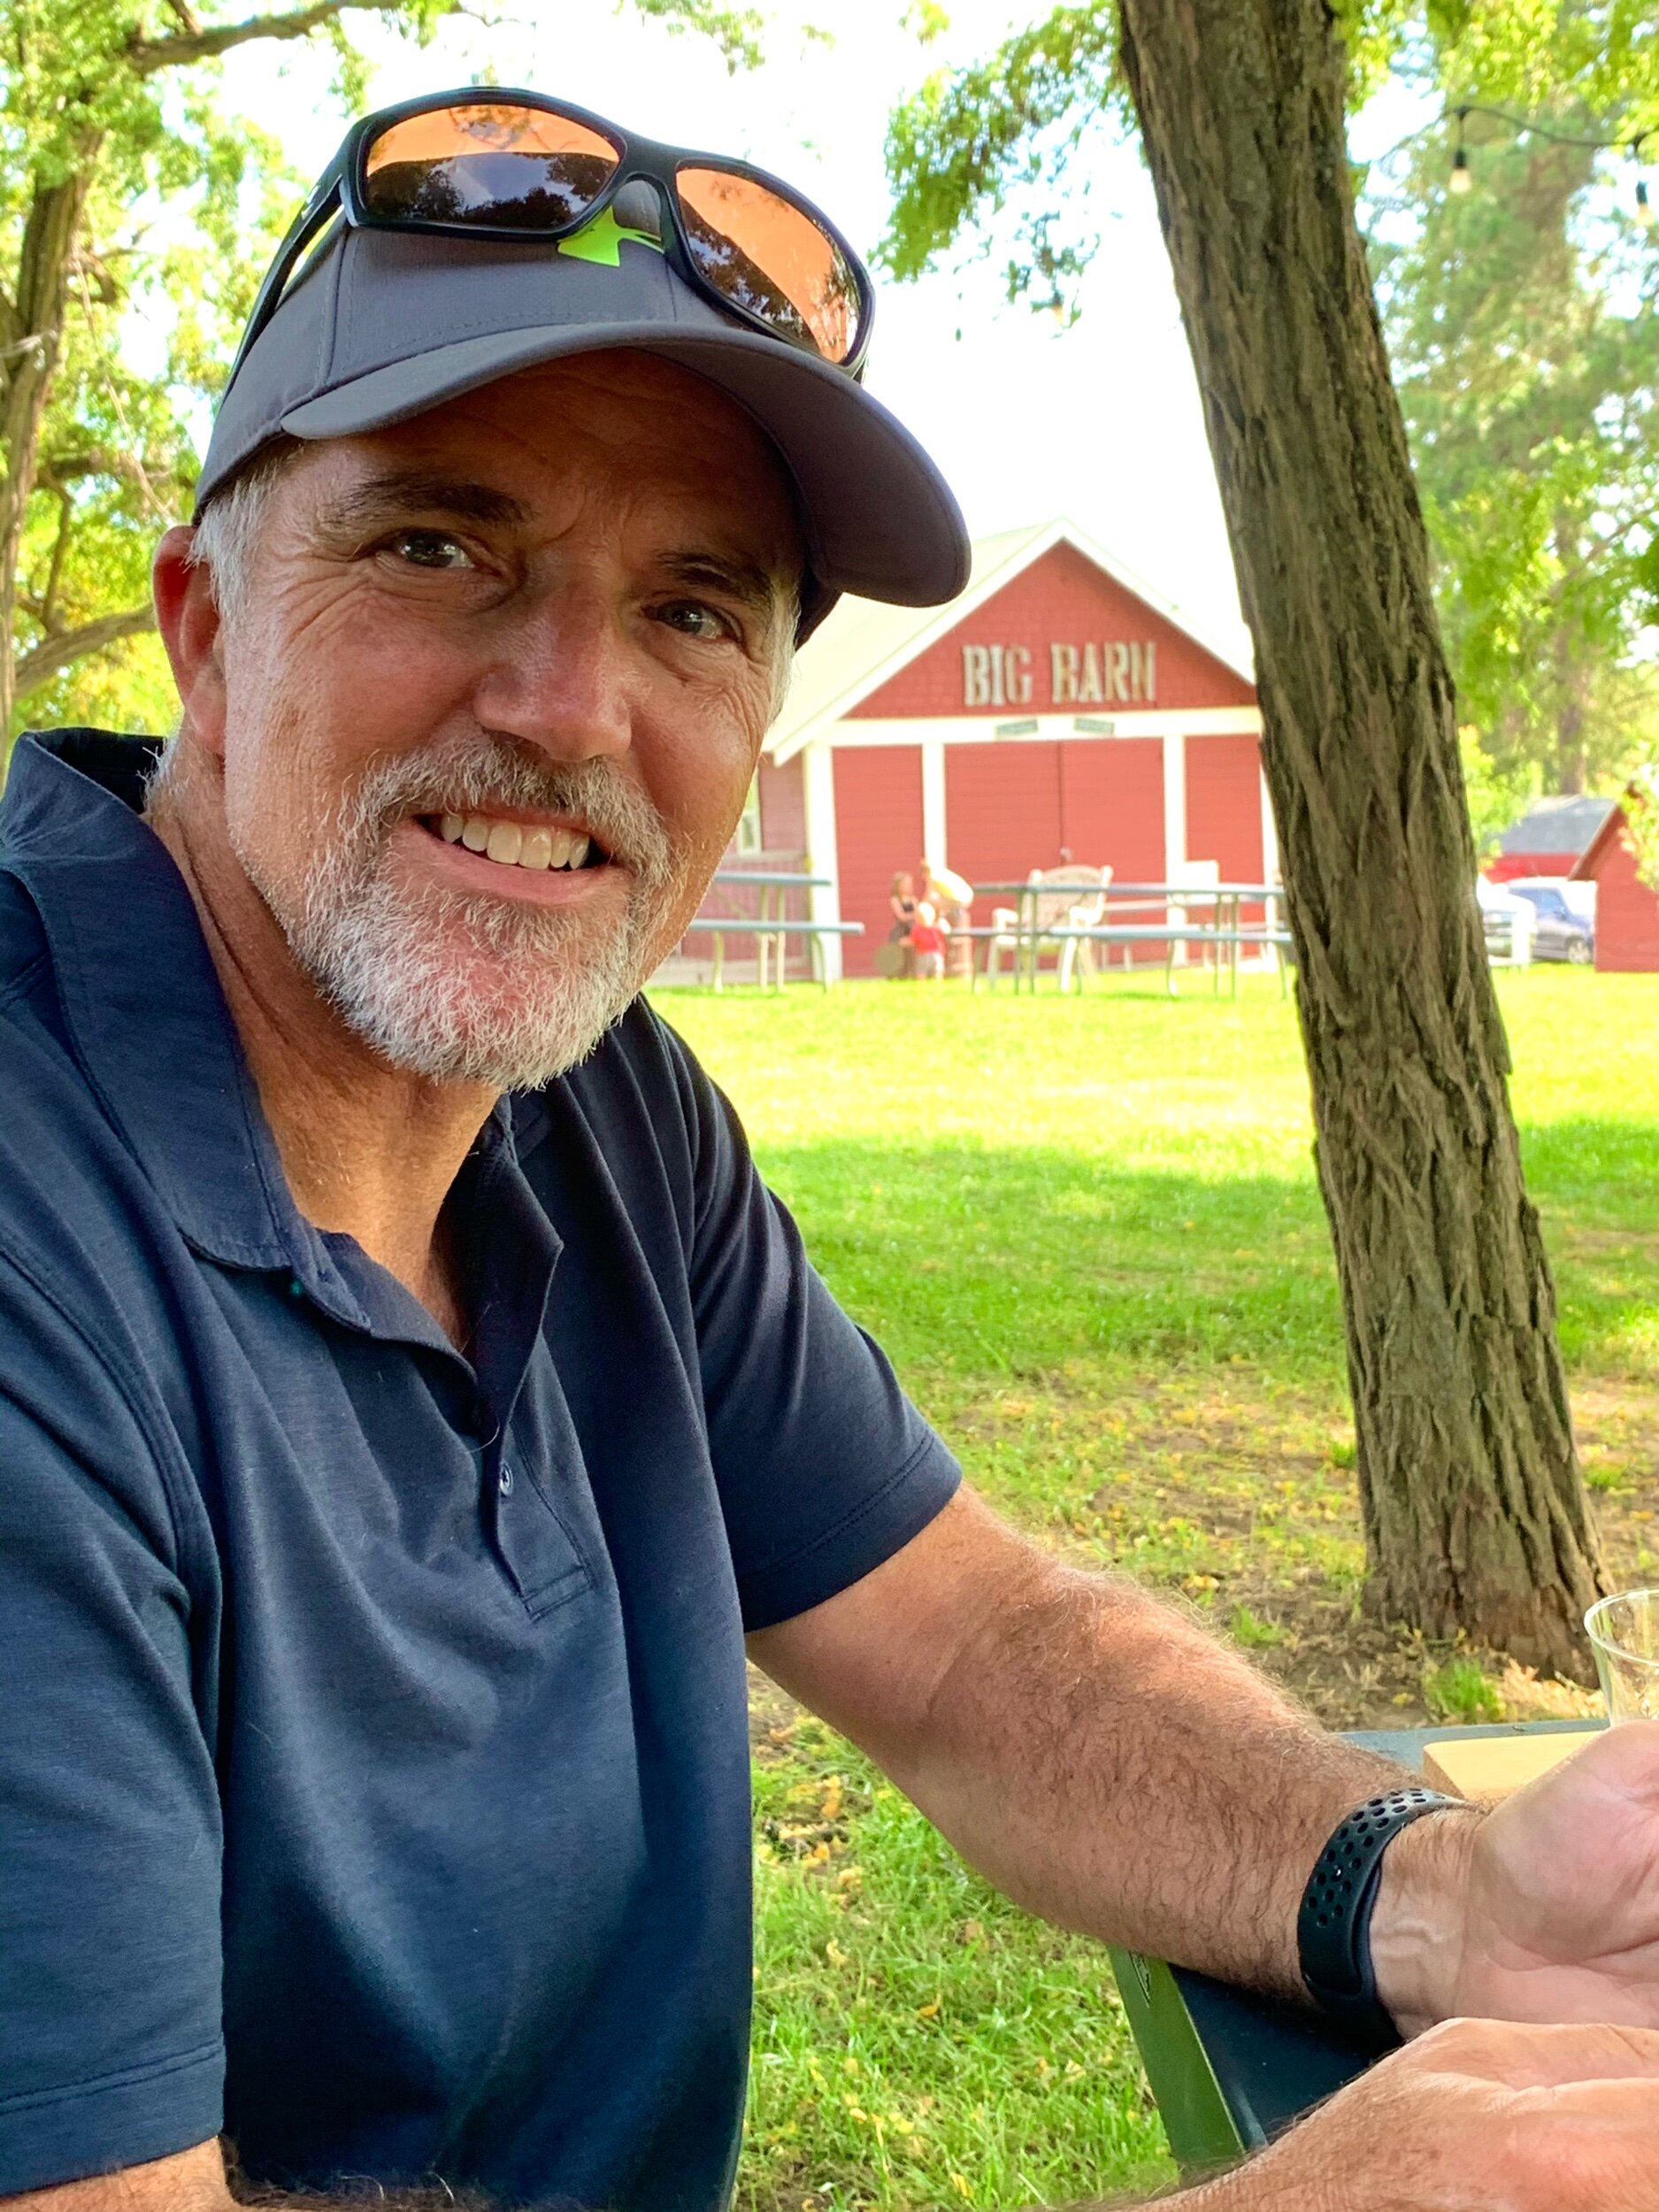  We went to explore some other farms and growers near Walters. As fate would have it—right next door,  Big Barn,  home of “bodacious berries,” grew their own hops and had their own brewery. I think Craig is starting to like farm life. 